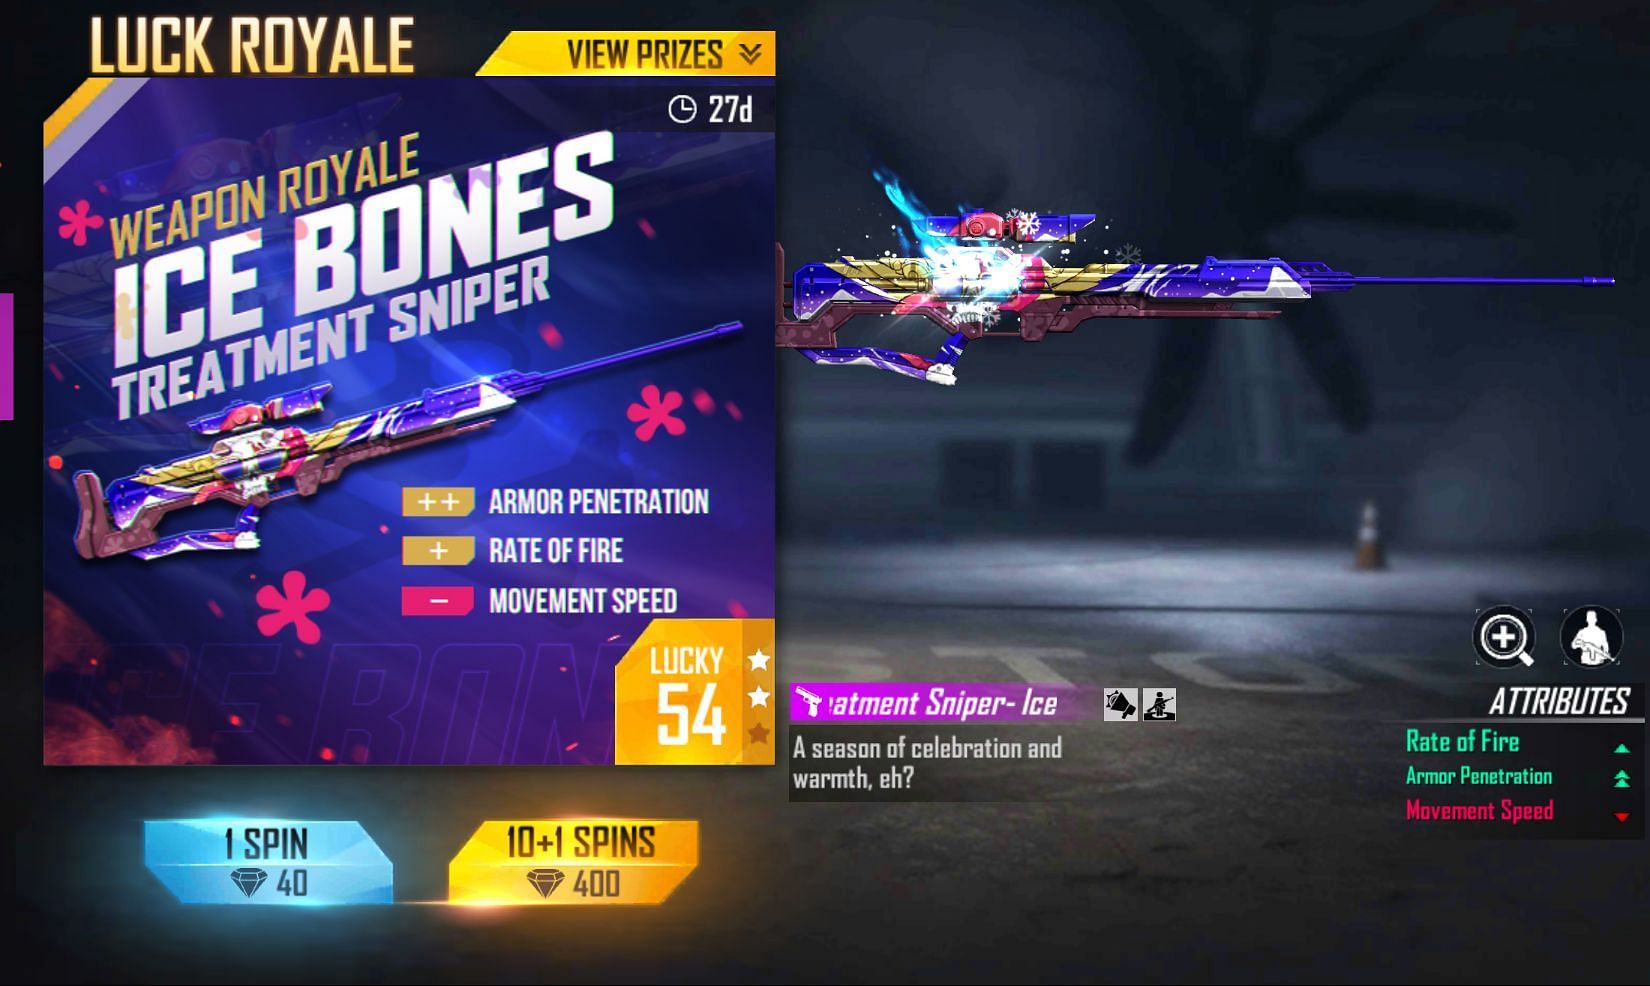 Users will have to spend 40 diamonds for 1 spin (Image via Free Fire)